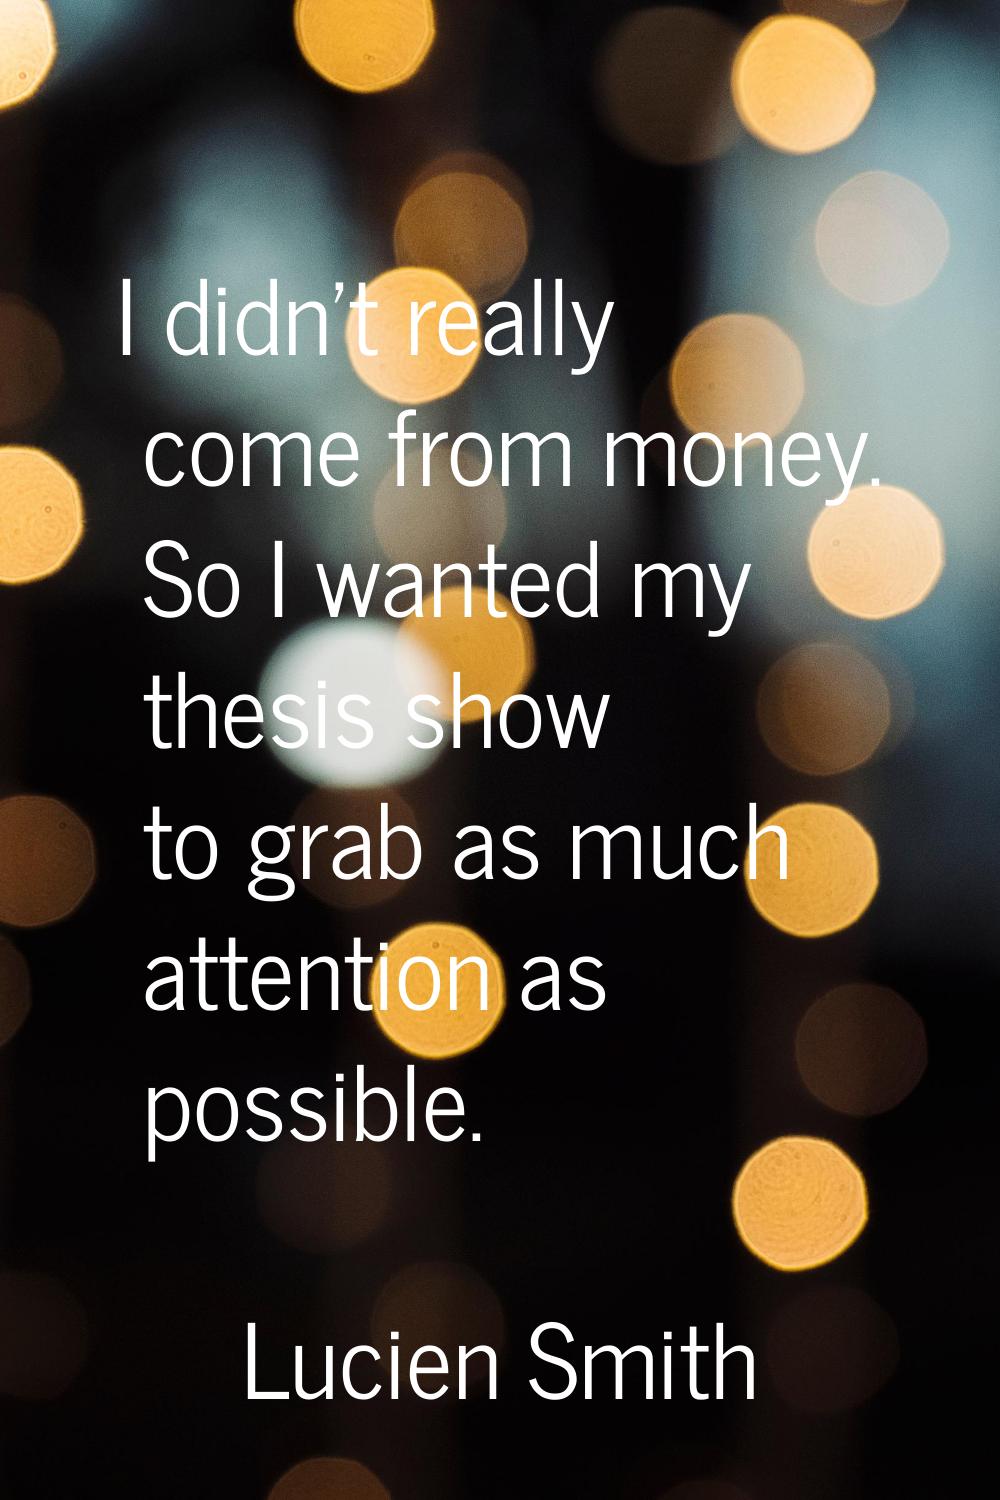 I didn't really come from money. So I wanted my thesis show to grab as much attention as possible.